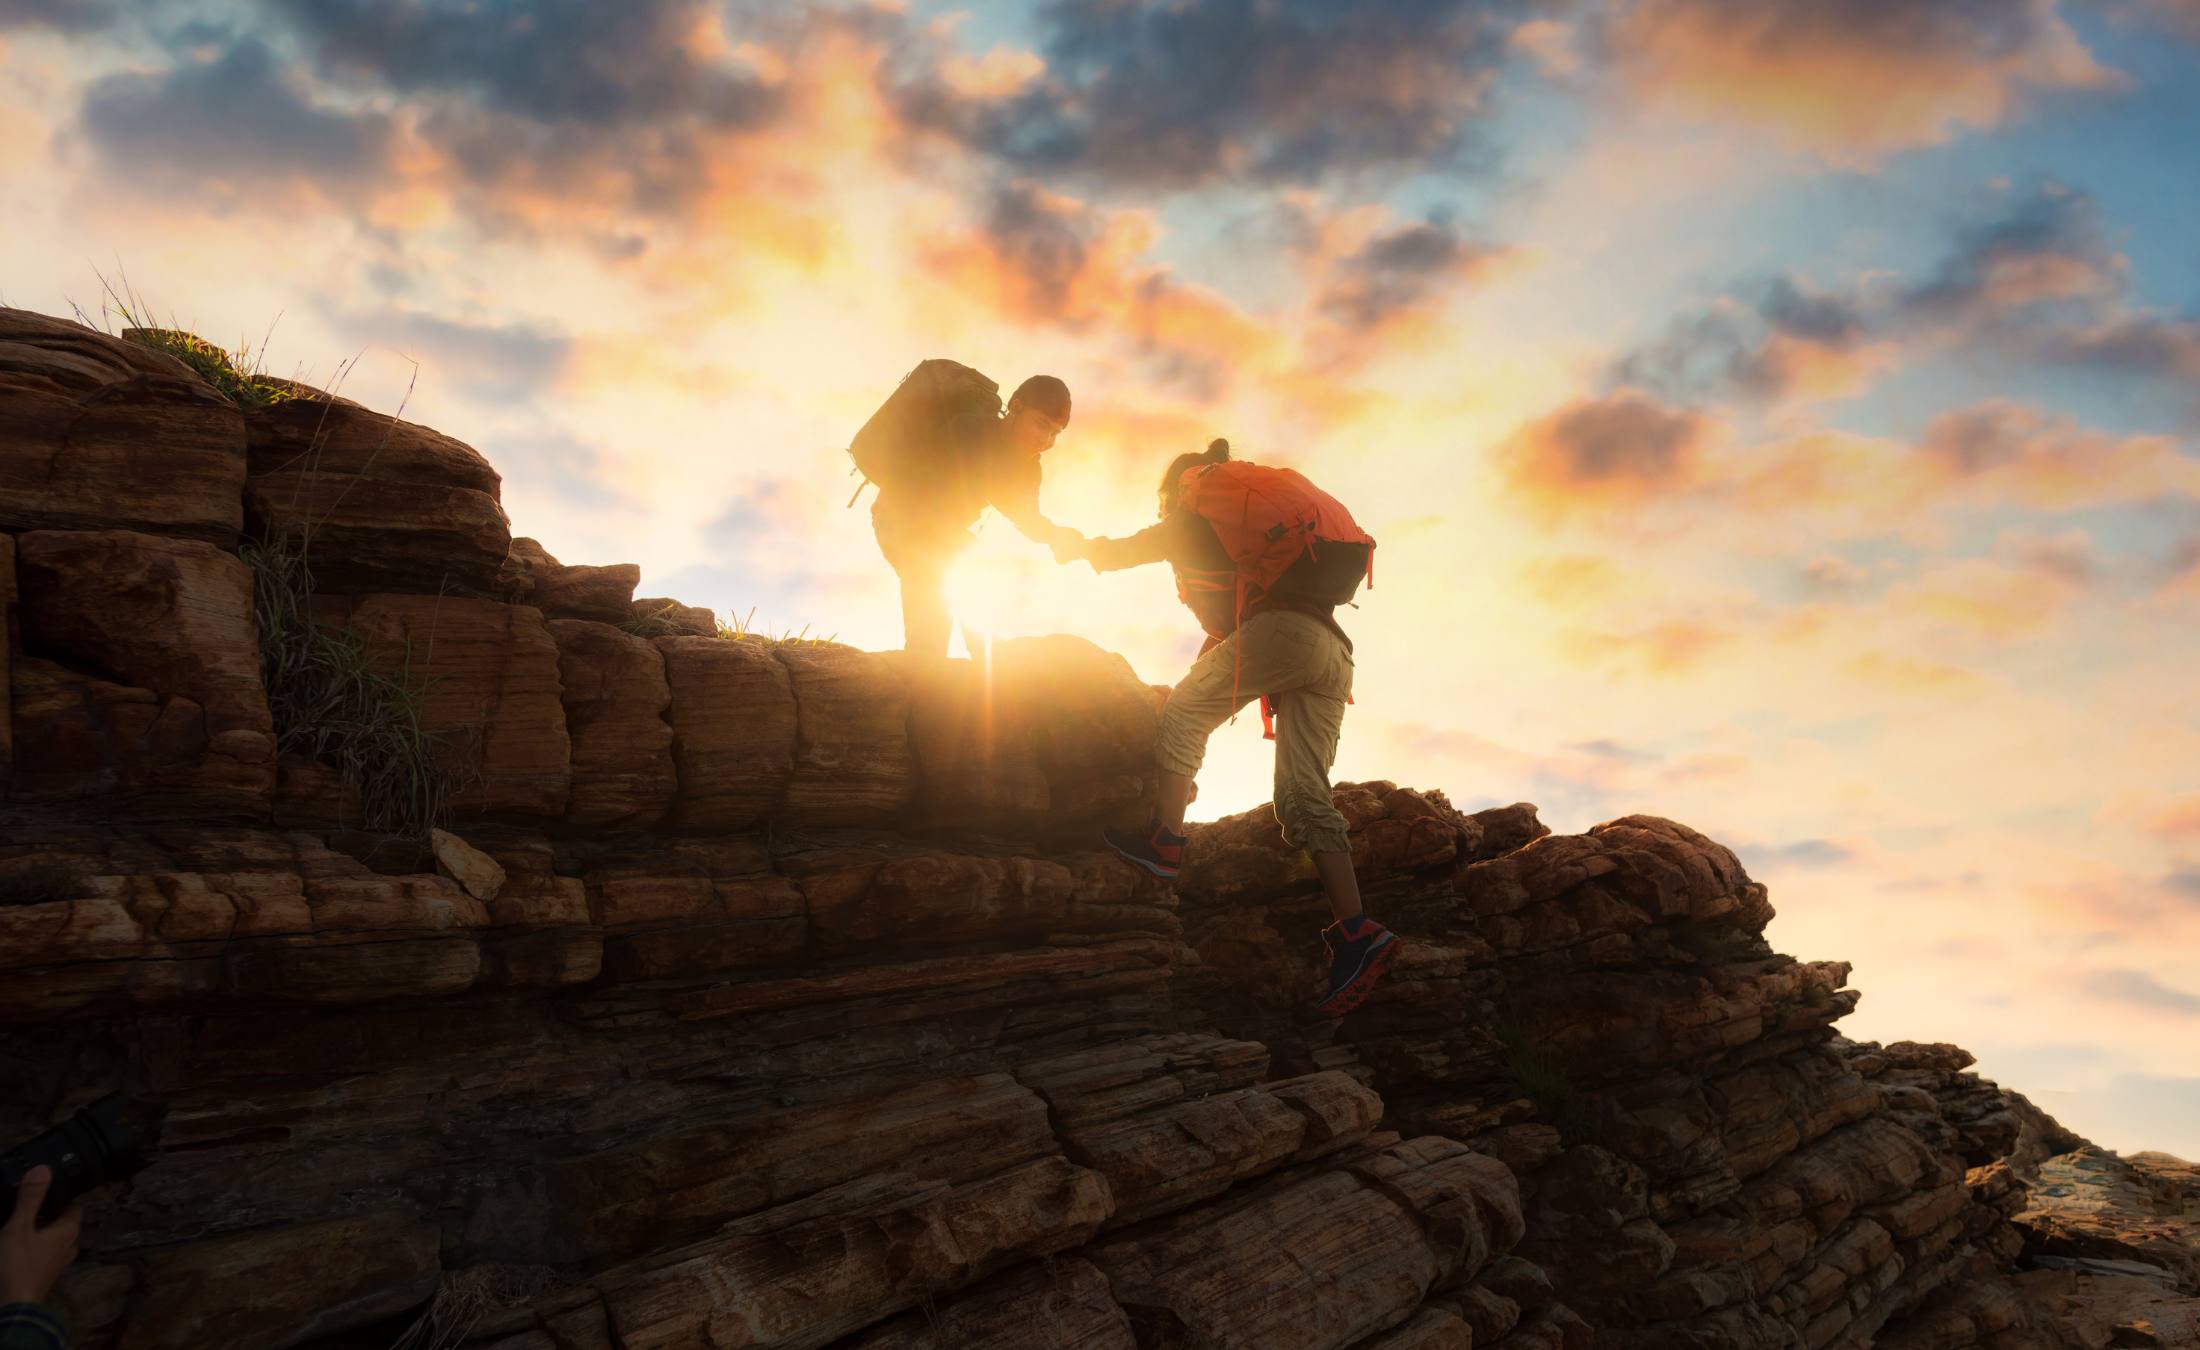 Person helping another up a mountain at sunset.